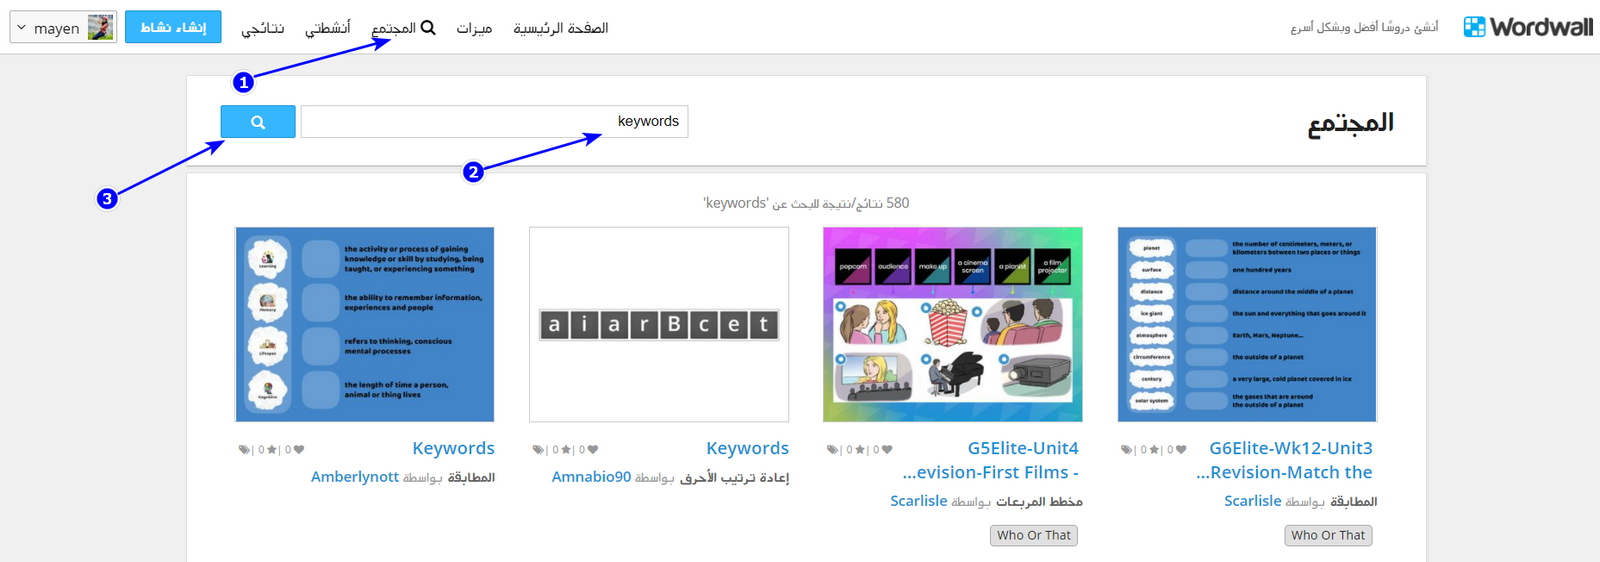 How_to_search_activities_from_the_community_-_Arabic_1.png